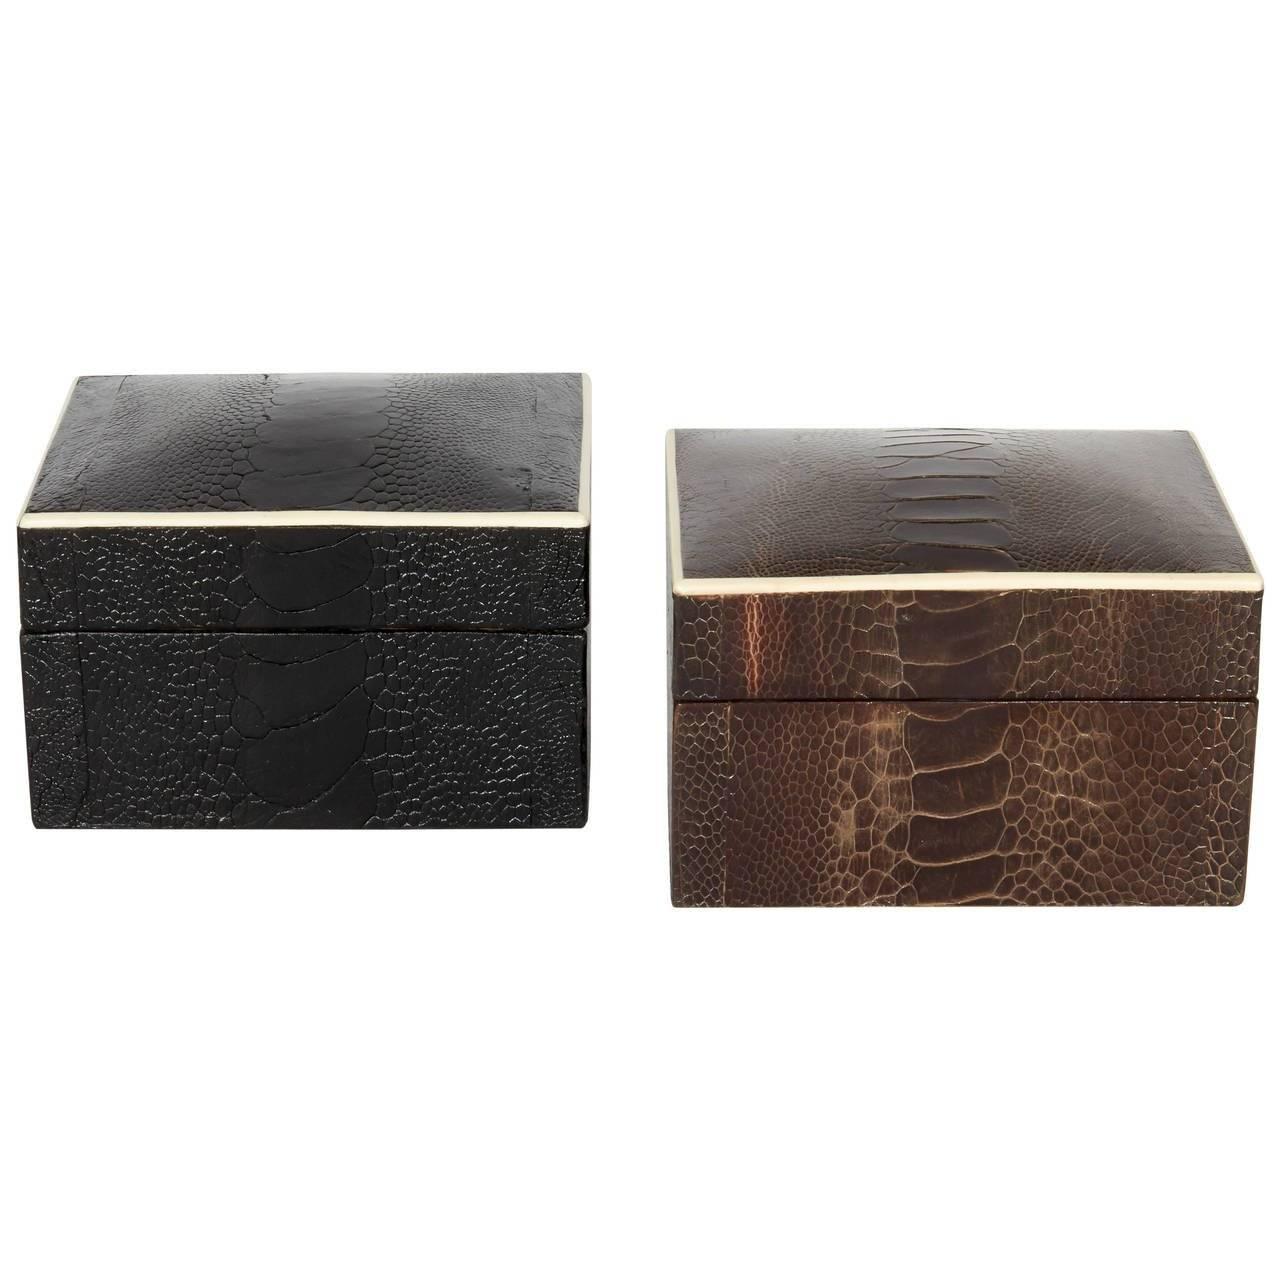 Dyed Exotic Black Ostrich Leather Decorative Box with Bone Inlay